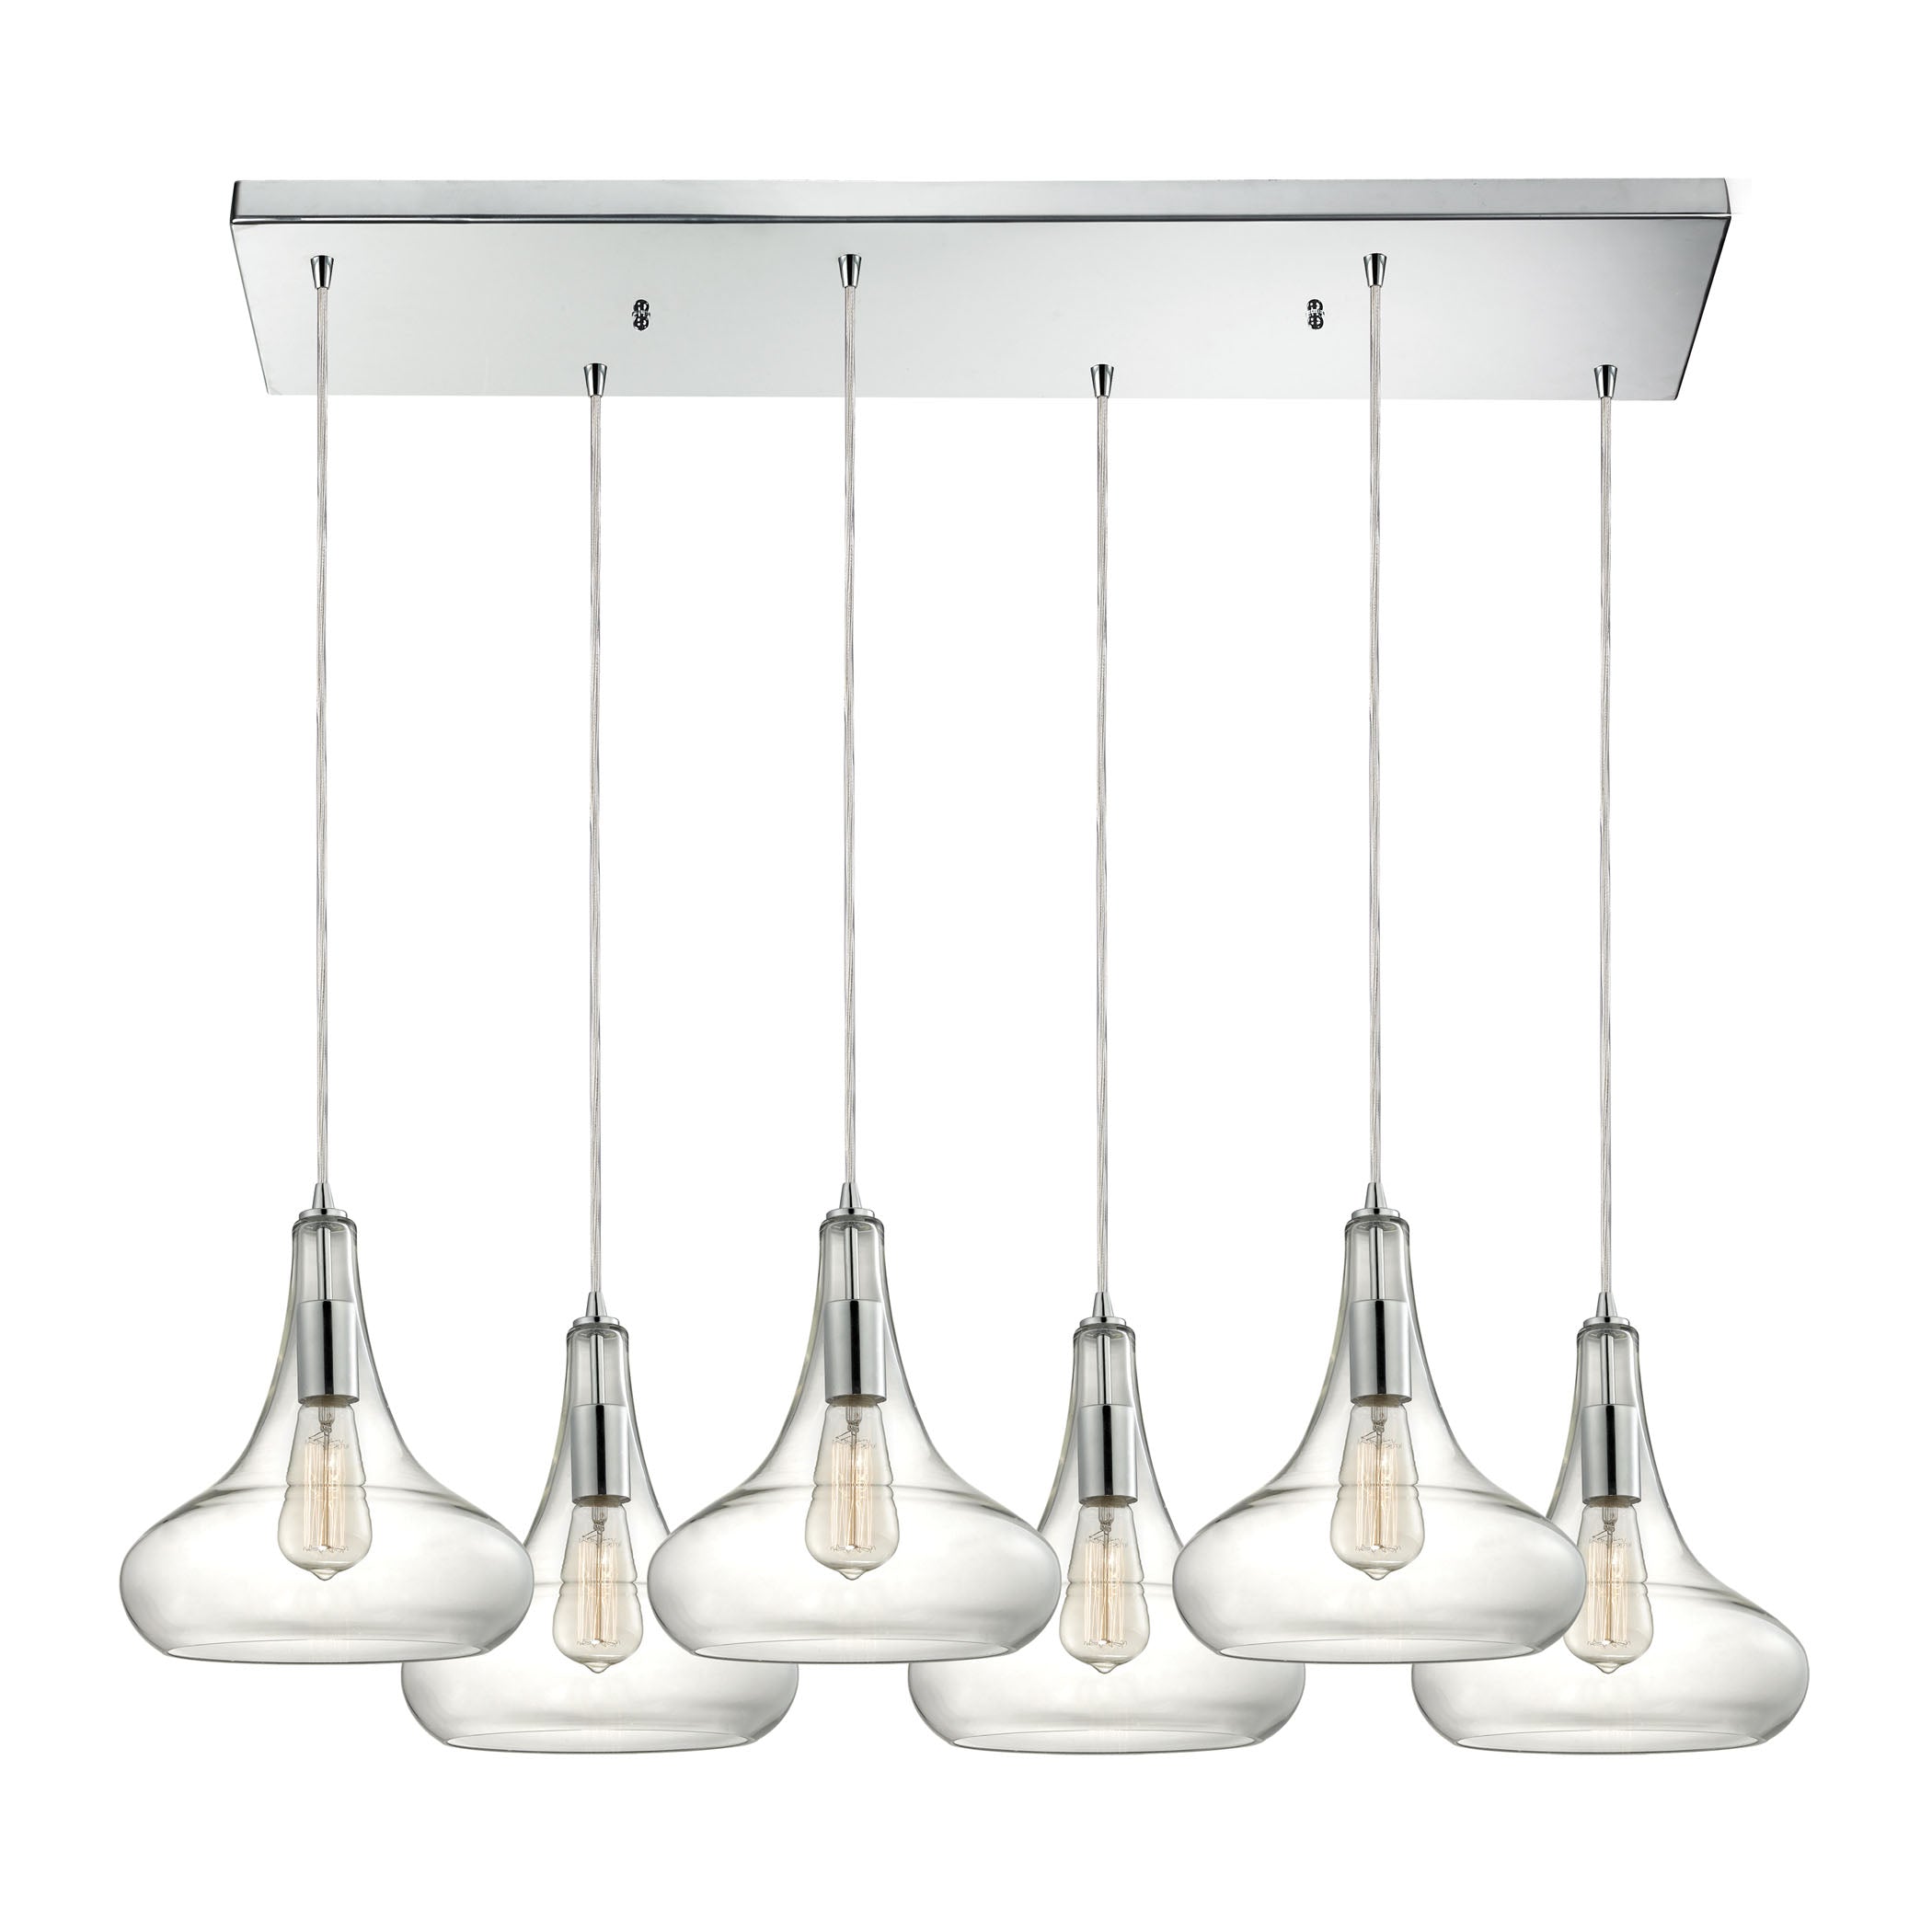 ELK Lighting 10422/6RC Orbital 6-Light Rectangular Pendant Fixture in Polished Chrome with Clear Glass